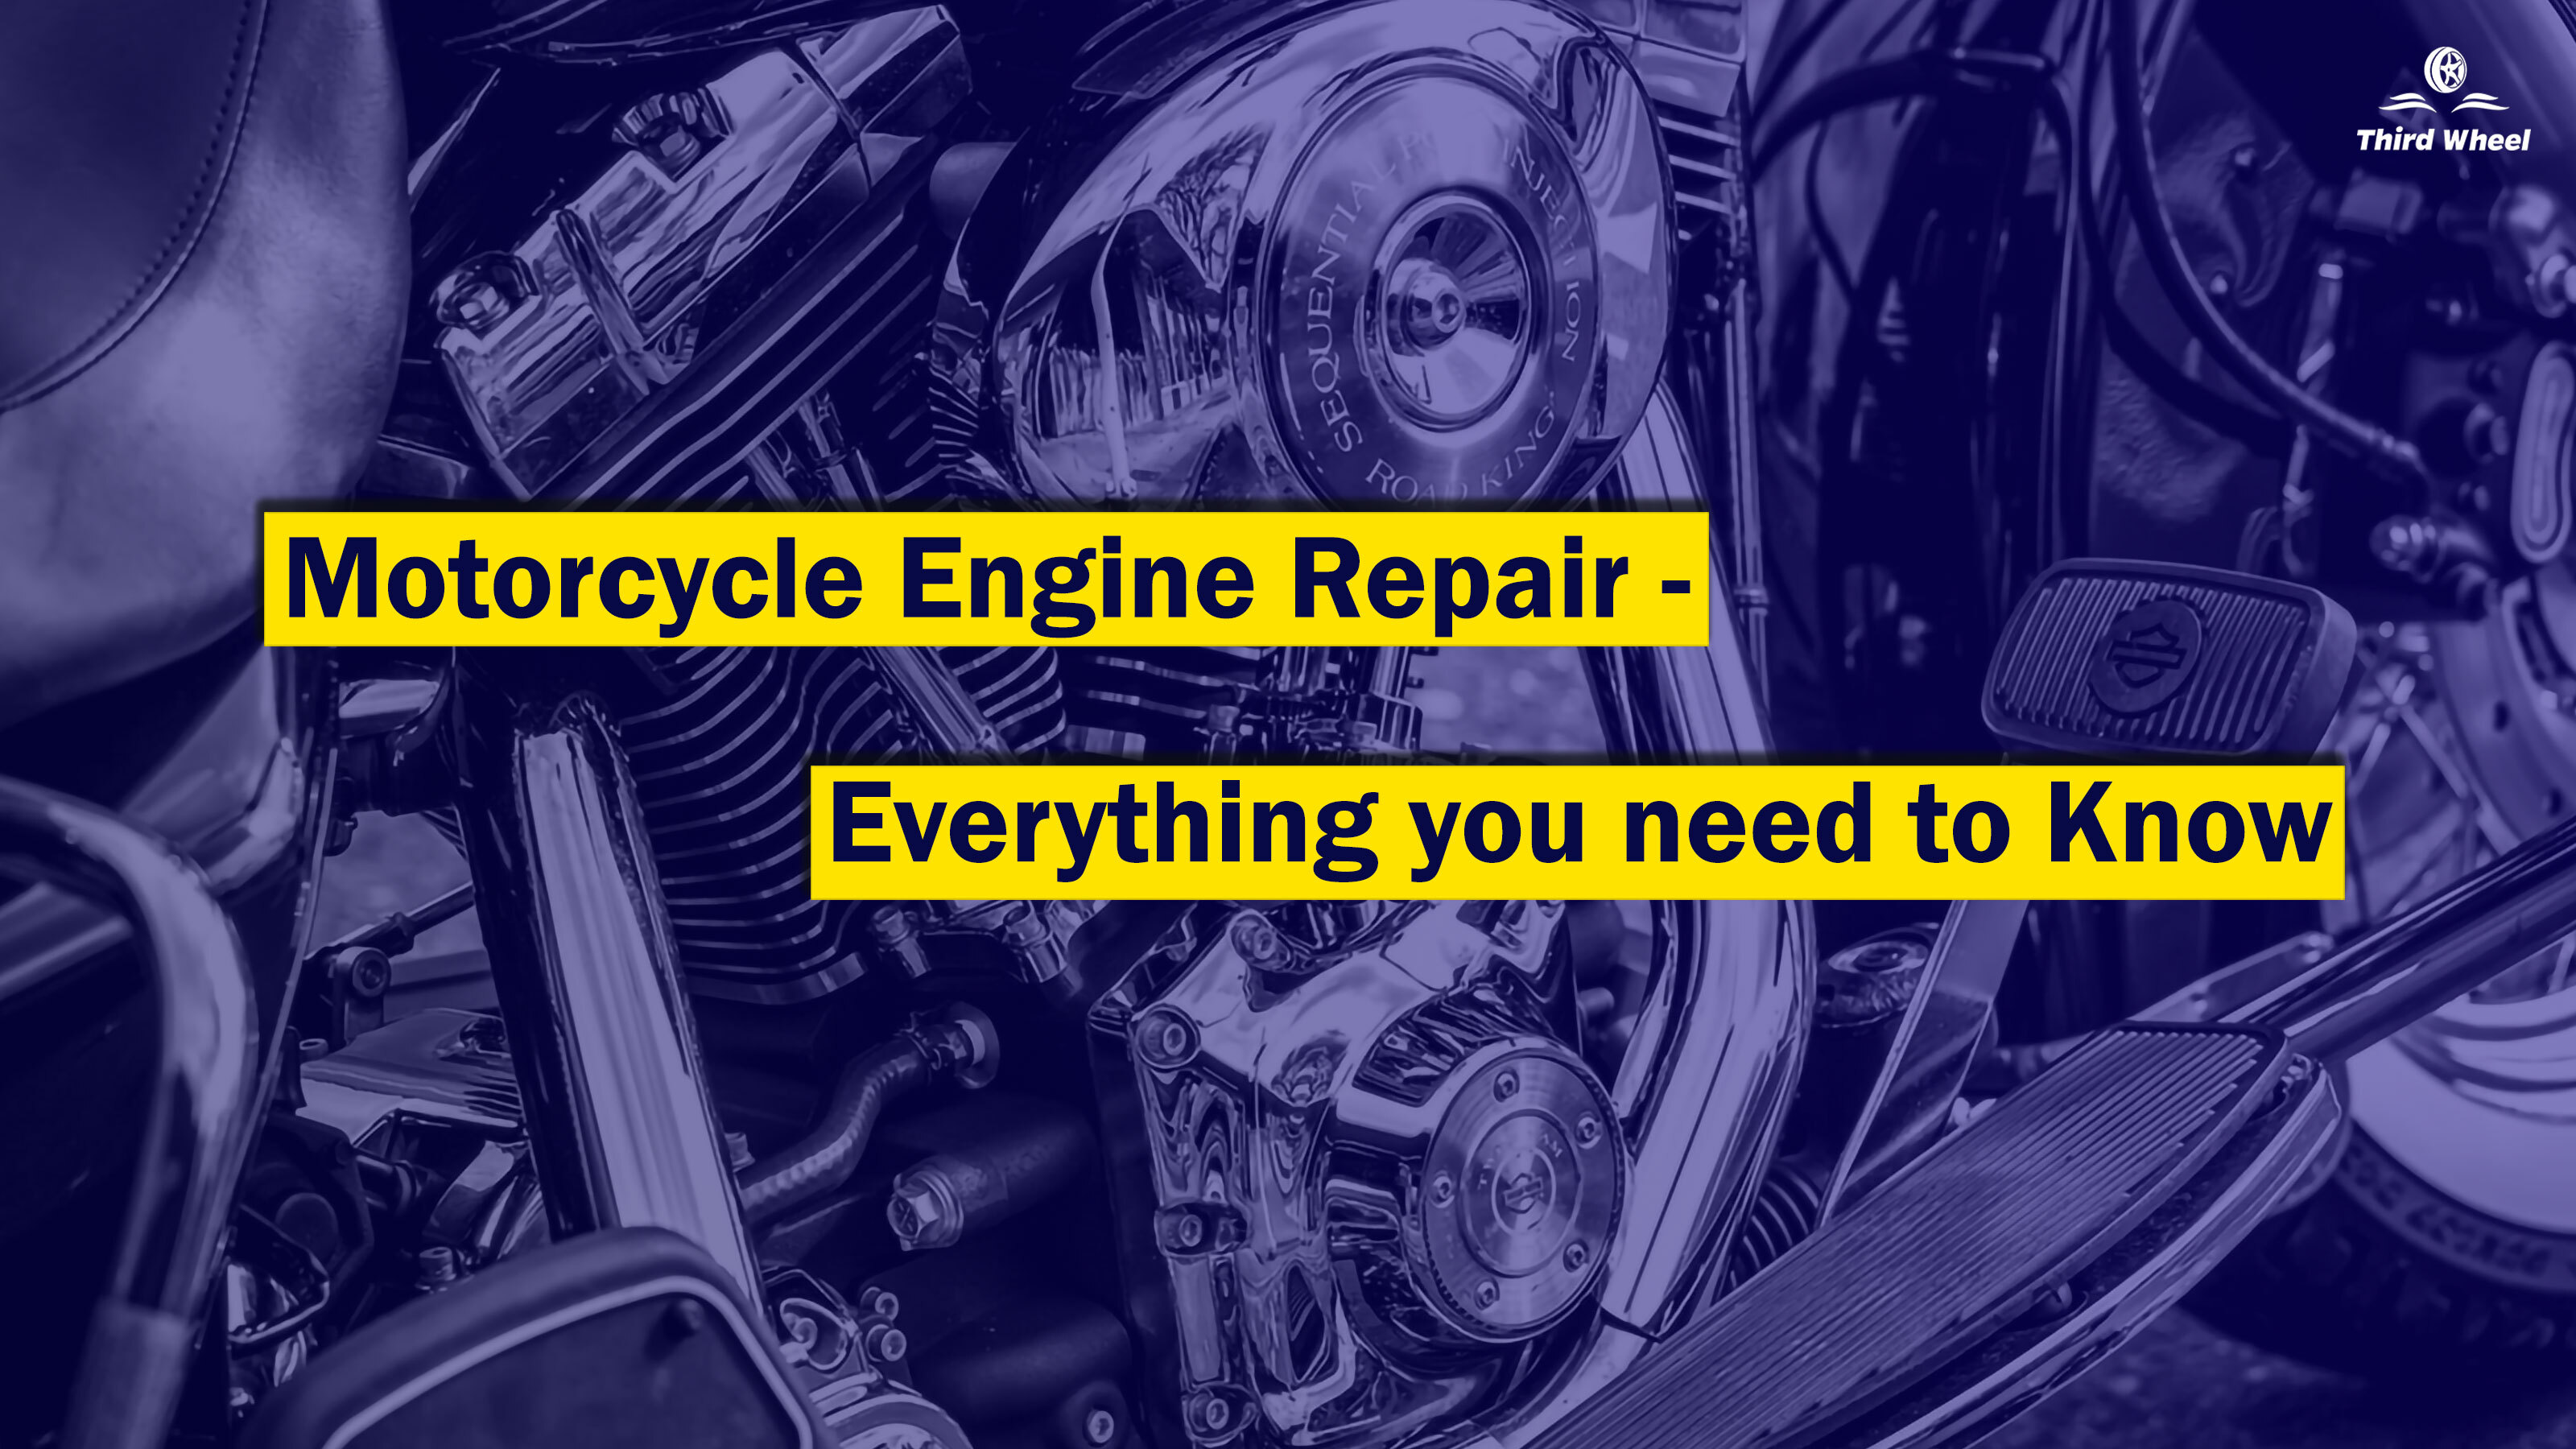 Motorcycle & Scooter Engine Repair - Everything you need to know